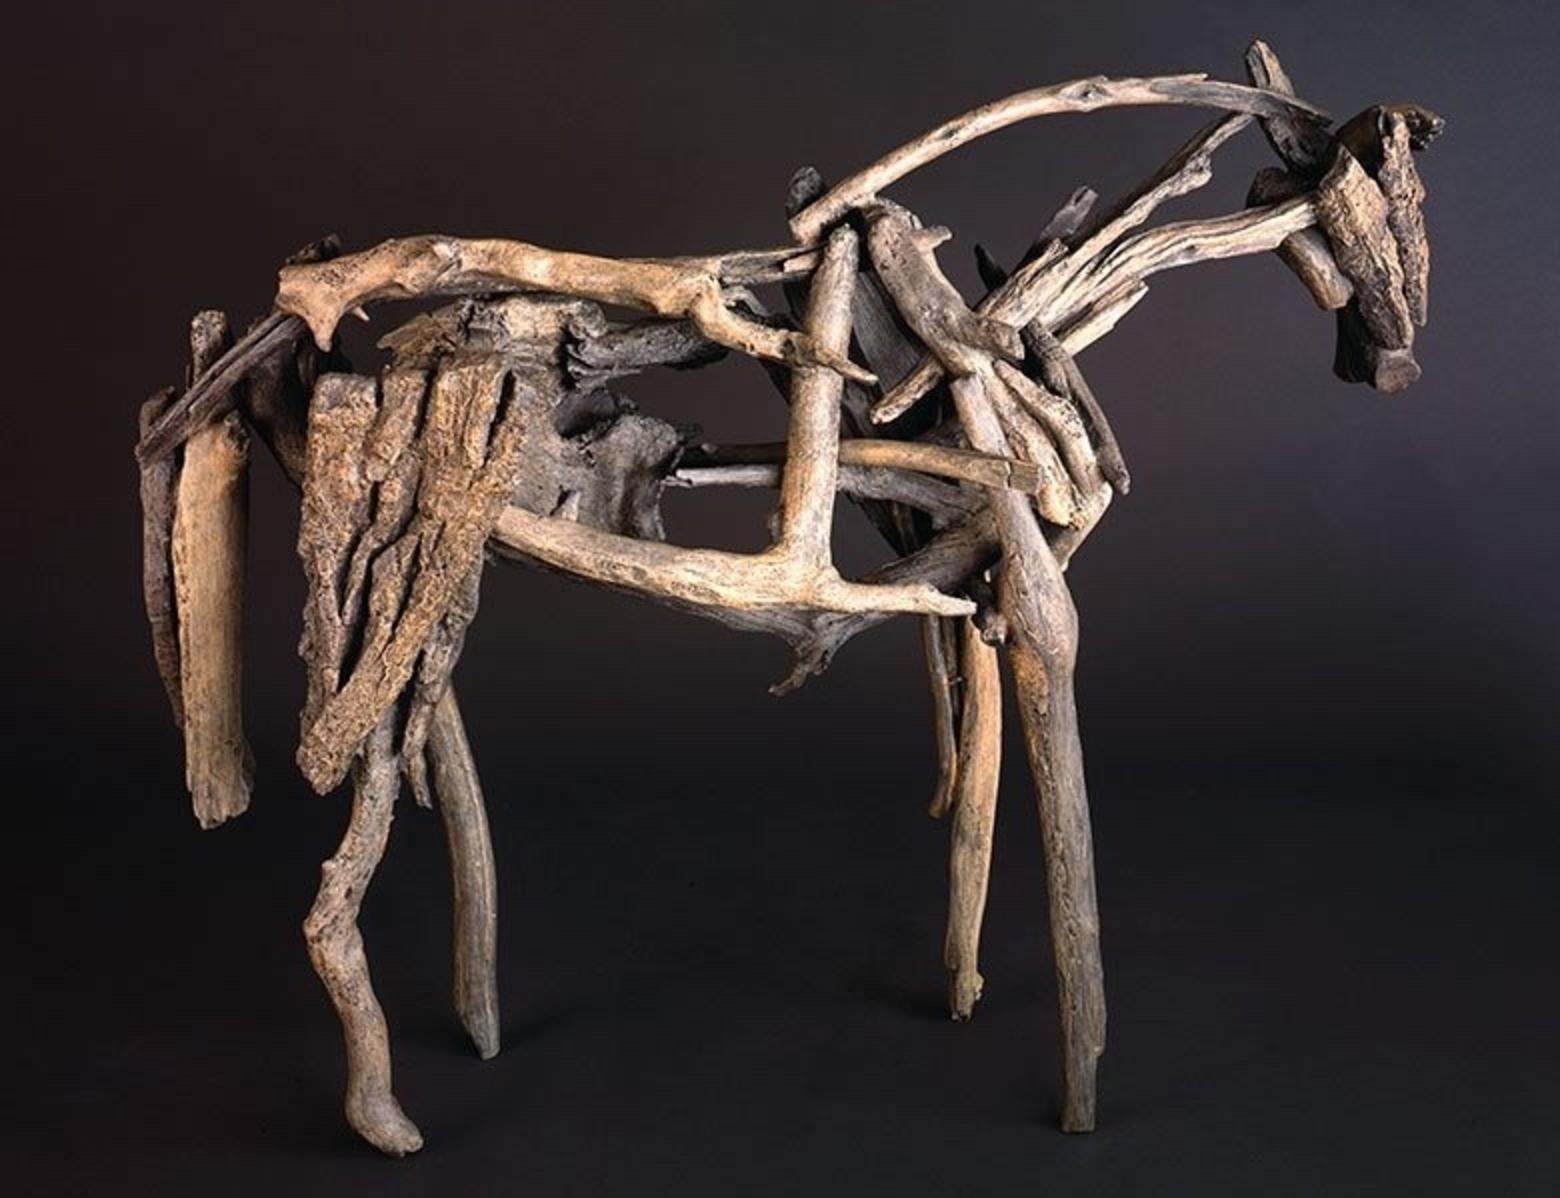 &quot;Berliner&quot; by Bozeman-based sculptor Deborah Butterfield, renowned internationally for her innovative use of found and organic natural materials in creating horse sculptures. This piece is part of the permanent collection at the Whitney Western Art Museum, part of the Buffalo Bill Center of the West in Cody, Wyoming. It was gifted to the museum by Mr. and Mrs. W.D. Weiss.